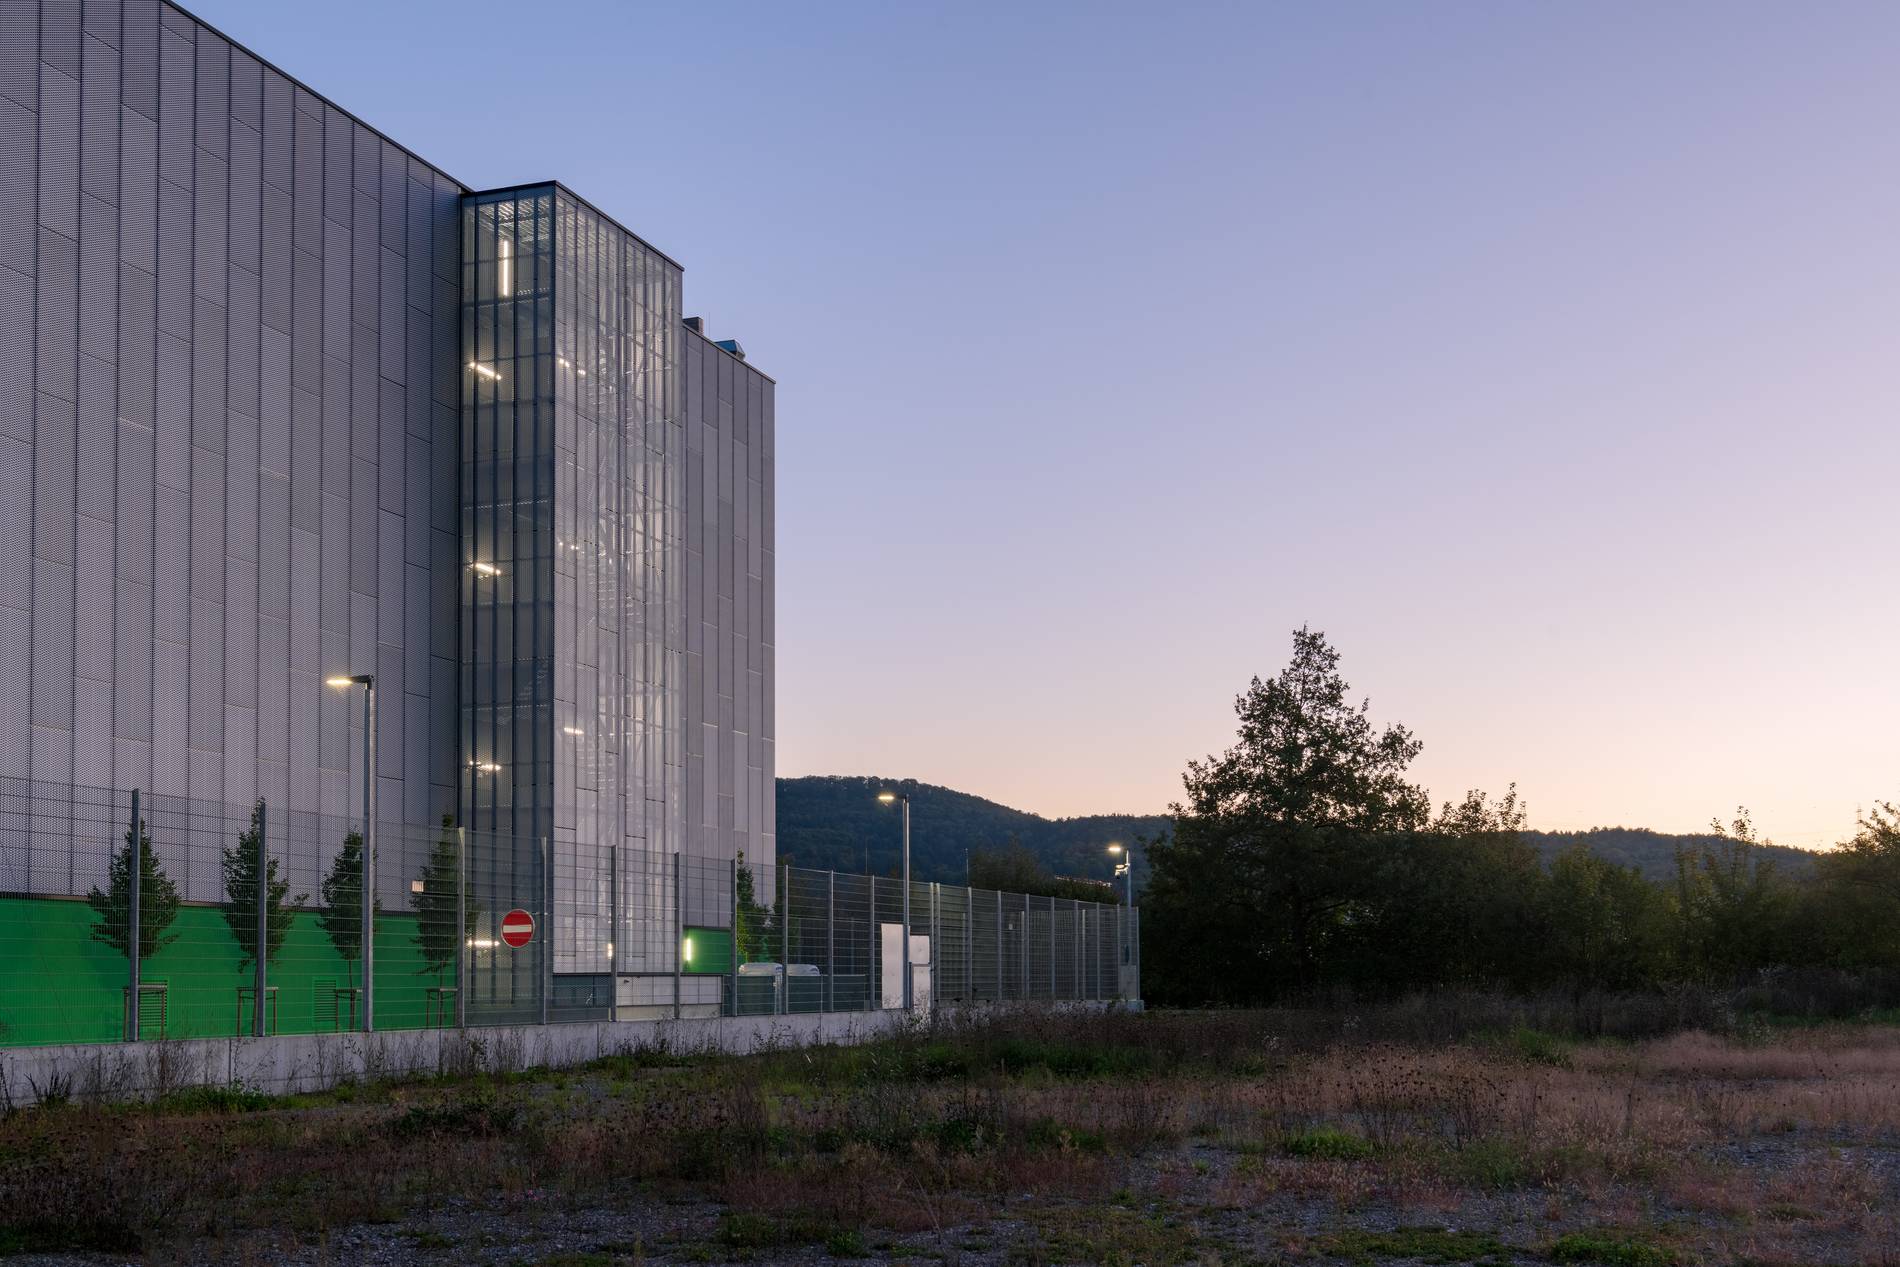 Green Datacenter Lupfig in the evening